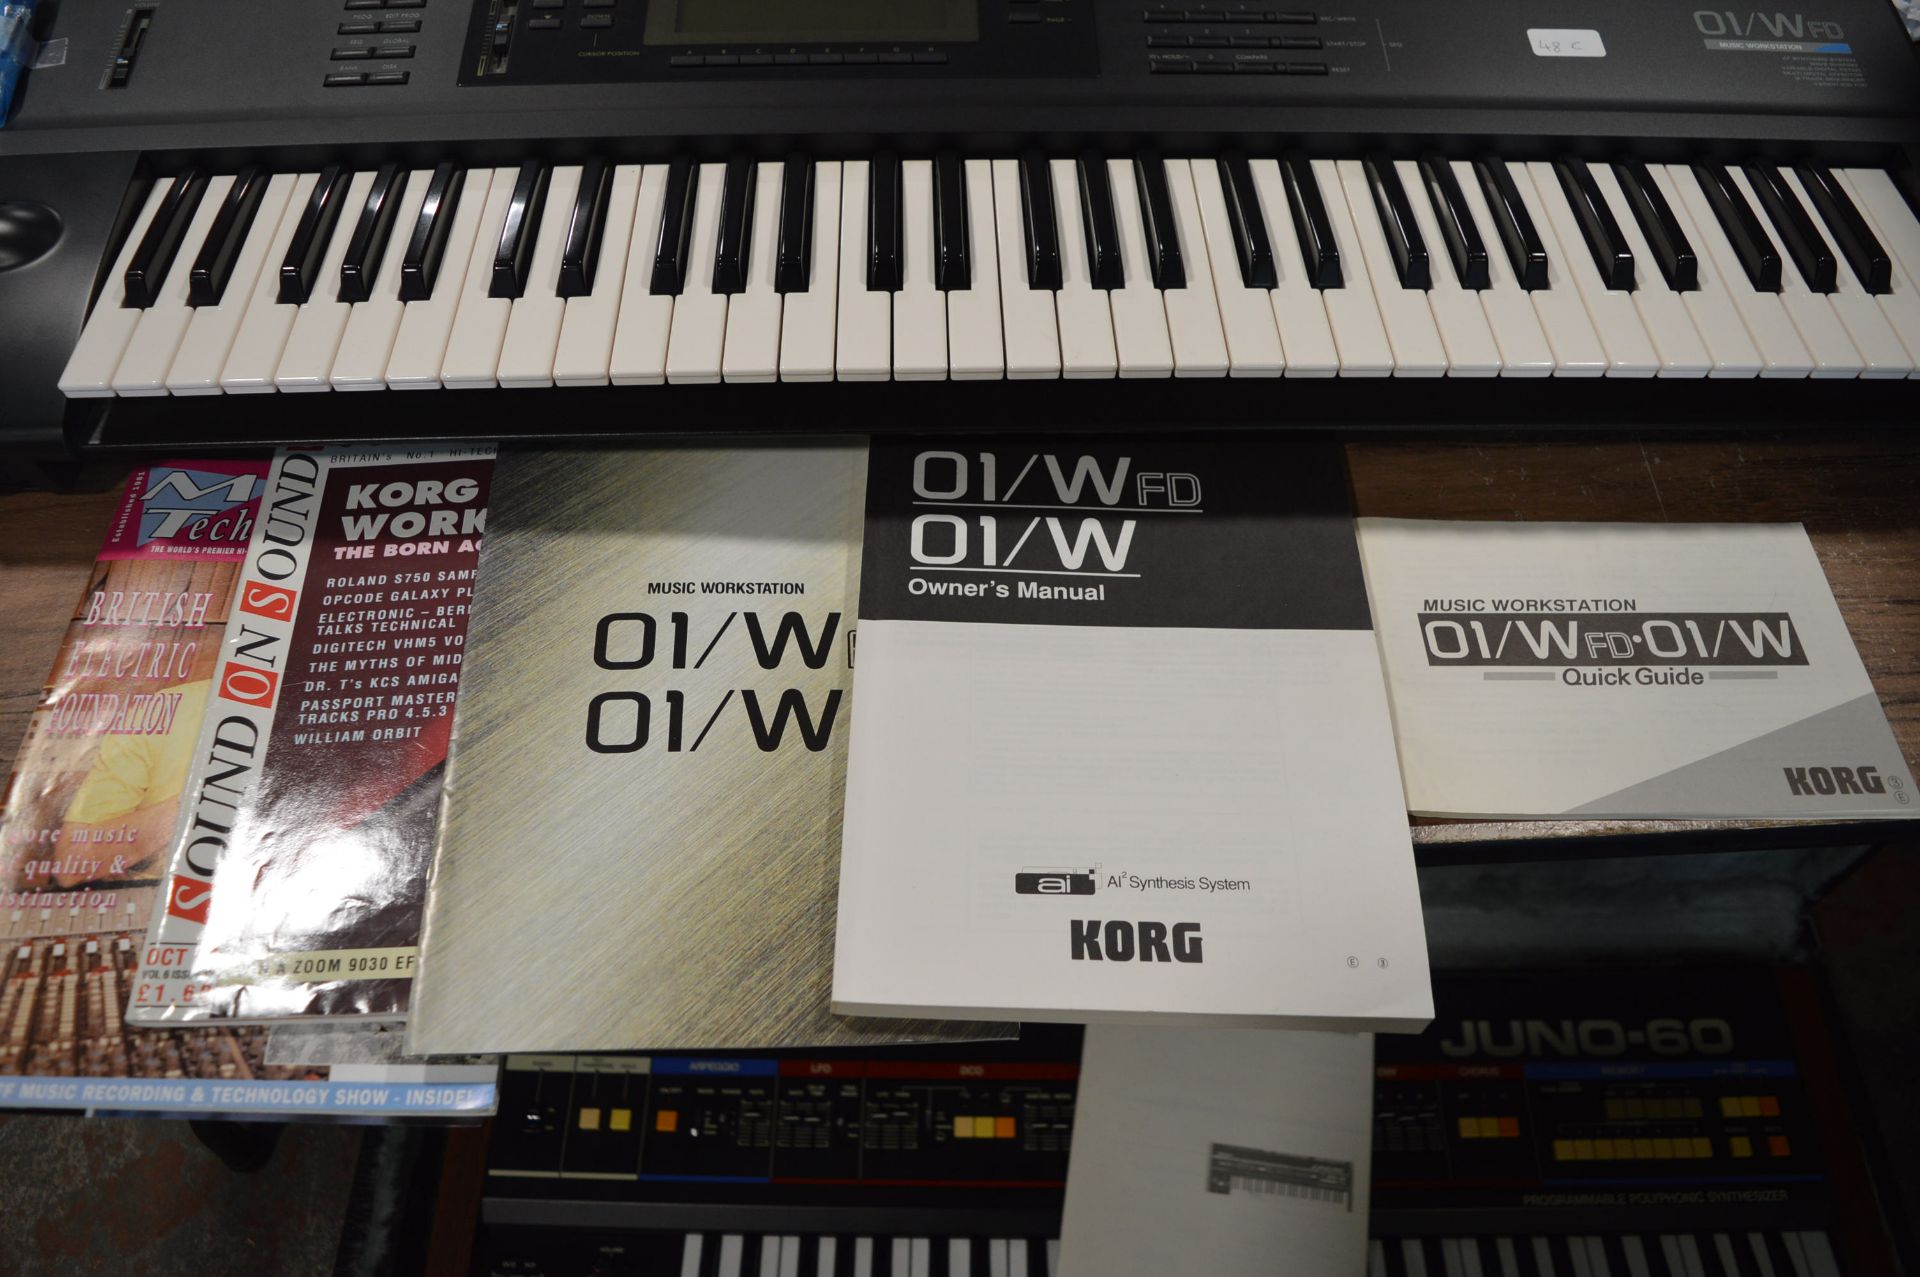 Korg 01/WFD Music Workstation Synthesiser (recently serviced) - Image 4 of 5